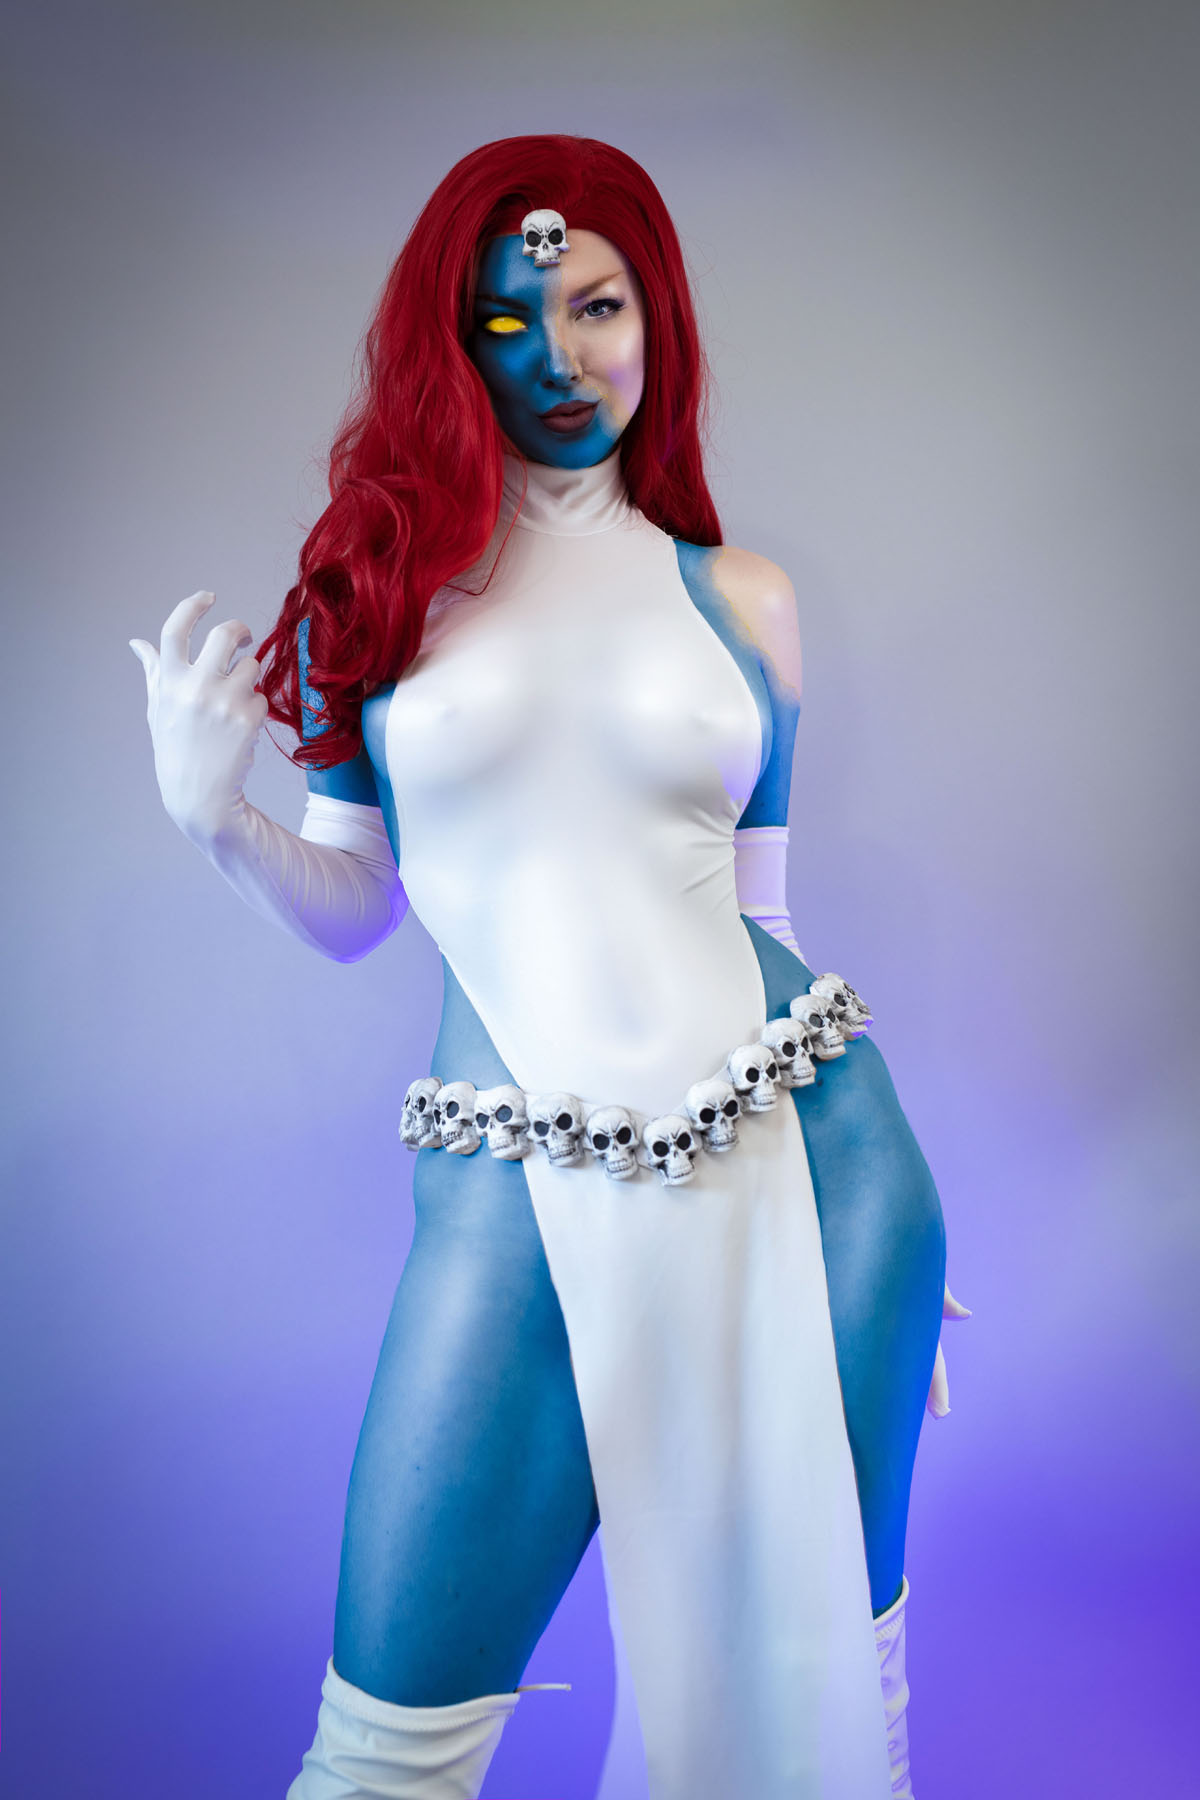 Mystique Cosplay Part 2: Wearing the Costume #5